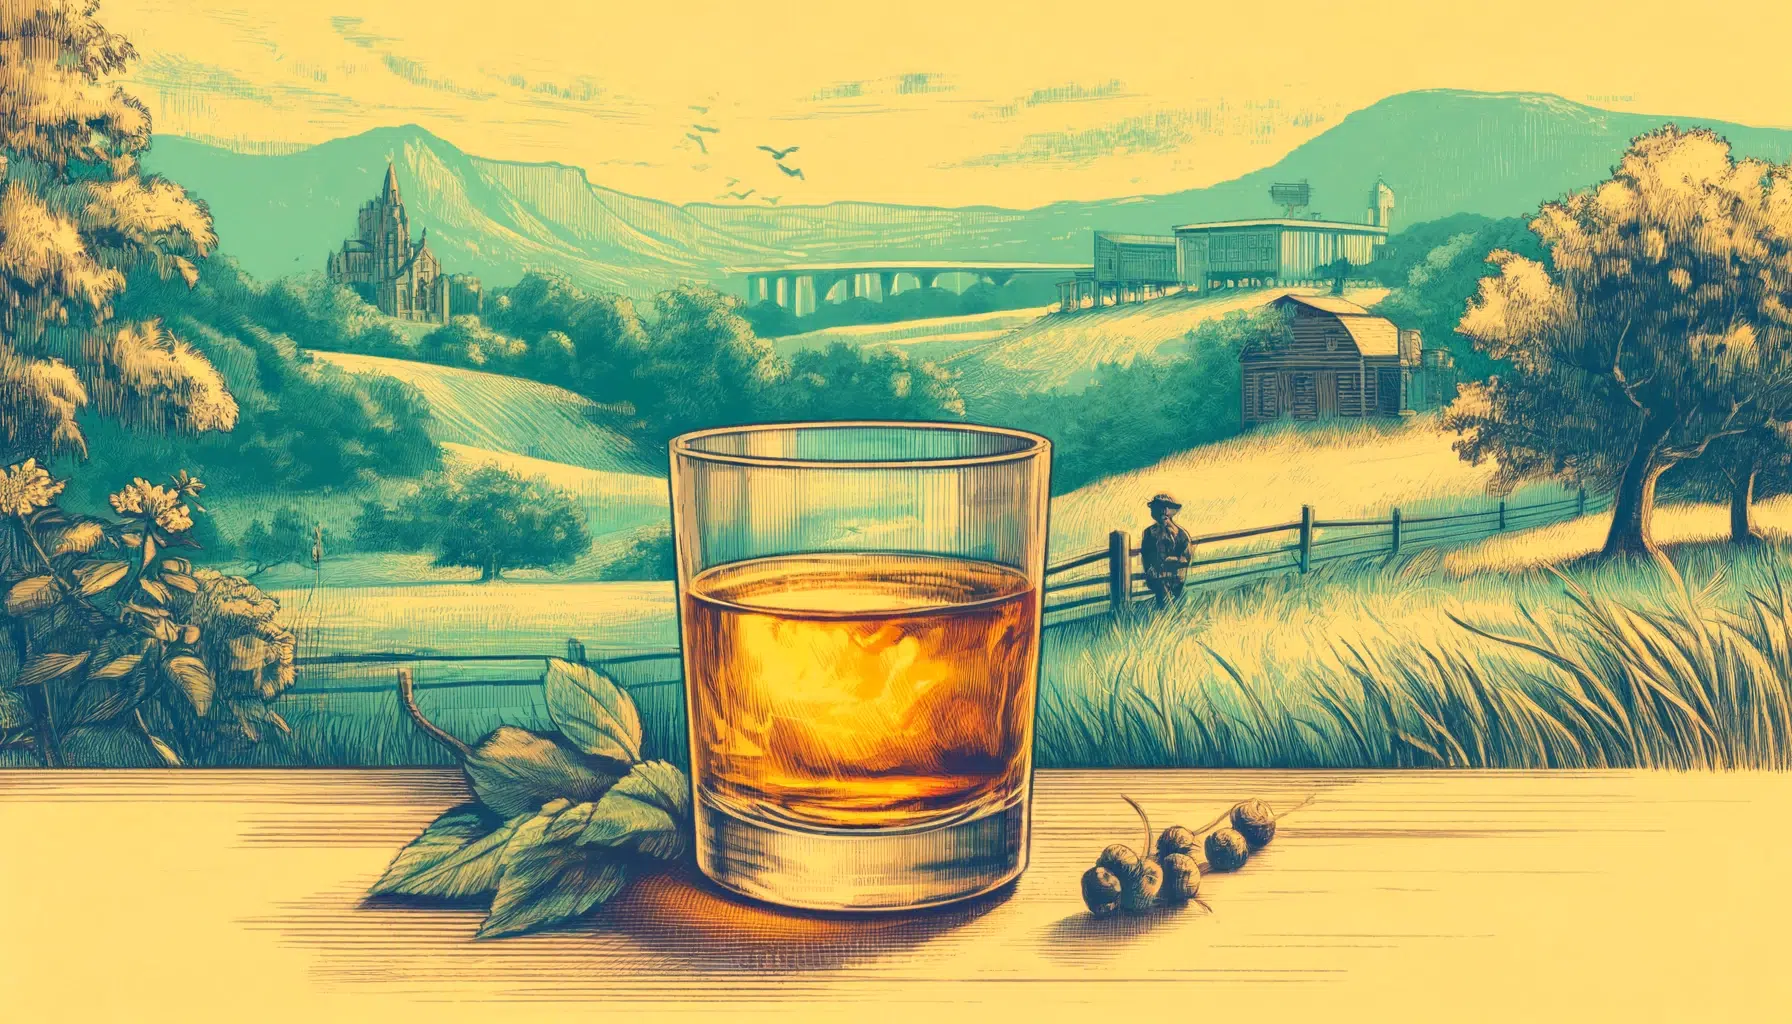 Illustrative whiskey glass in pastoral countryside setting.